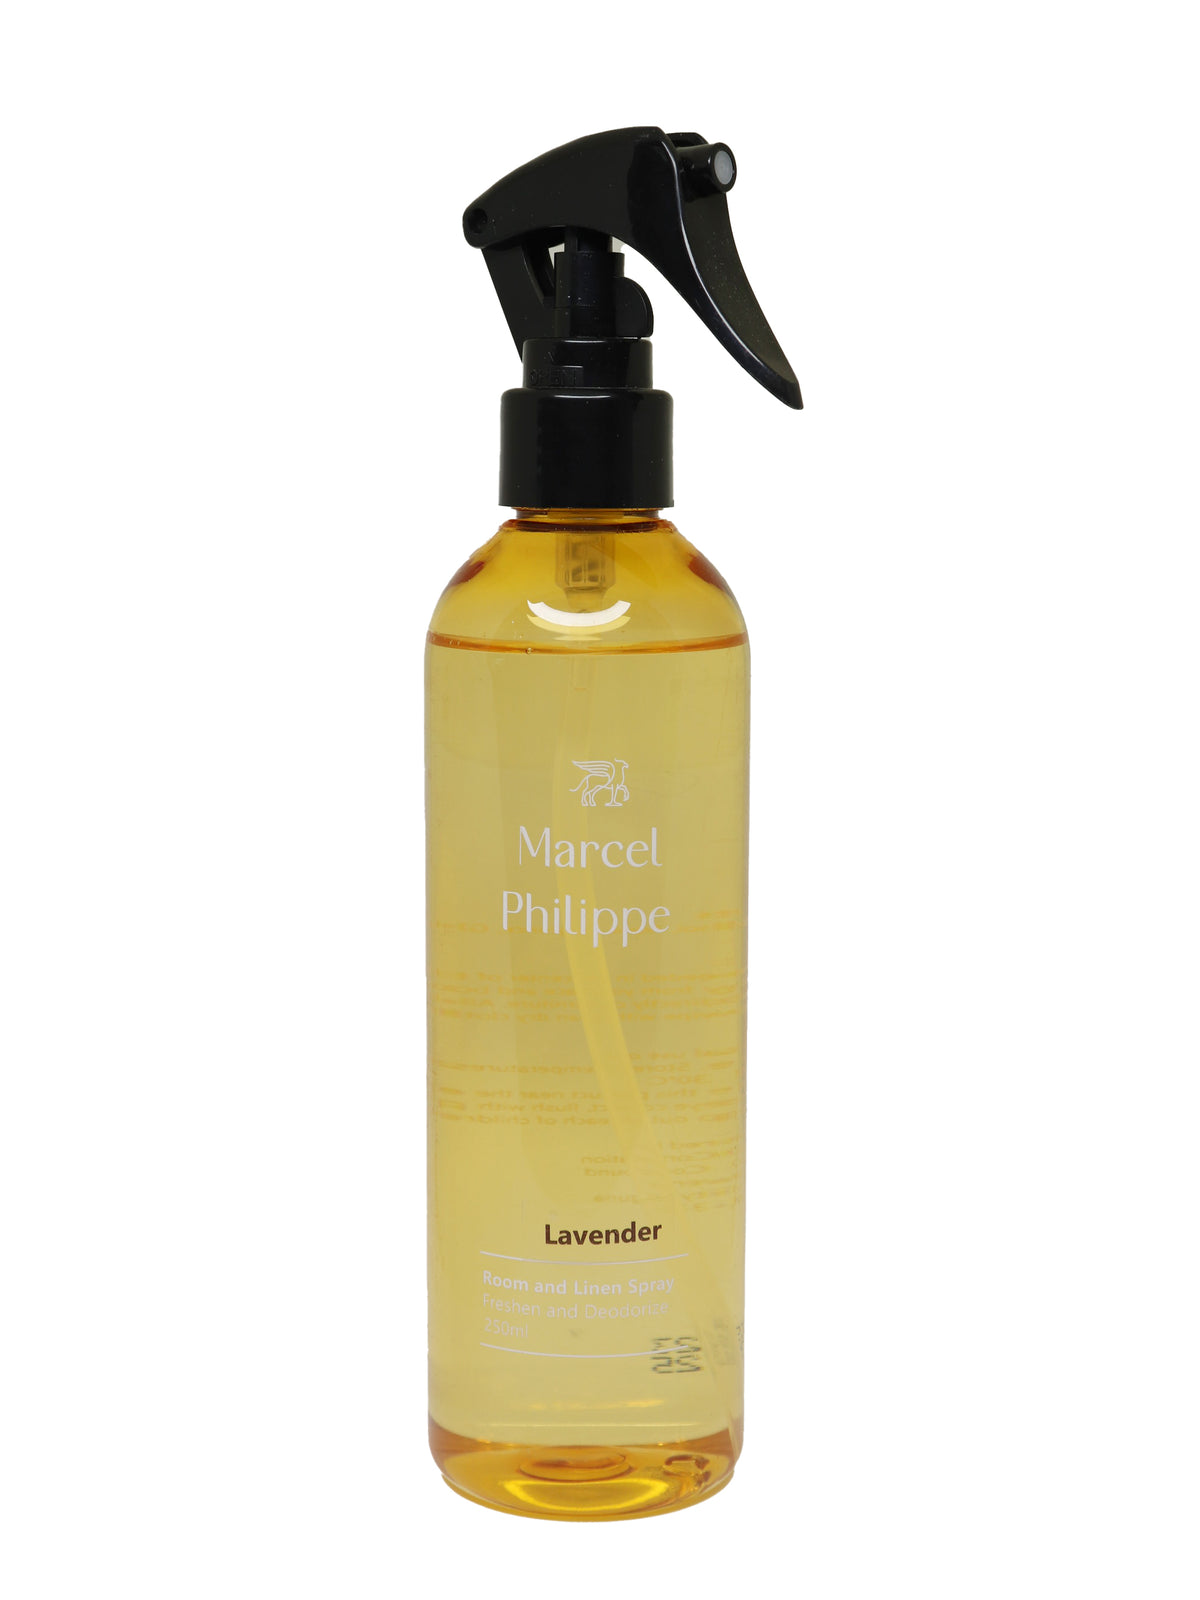 Marcel Philippe Room and Linen Spray 250ml